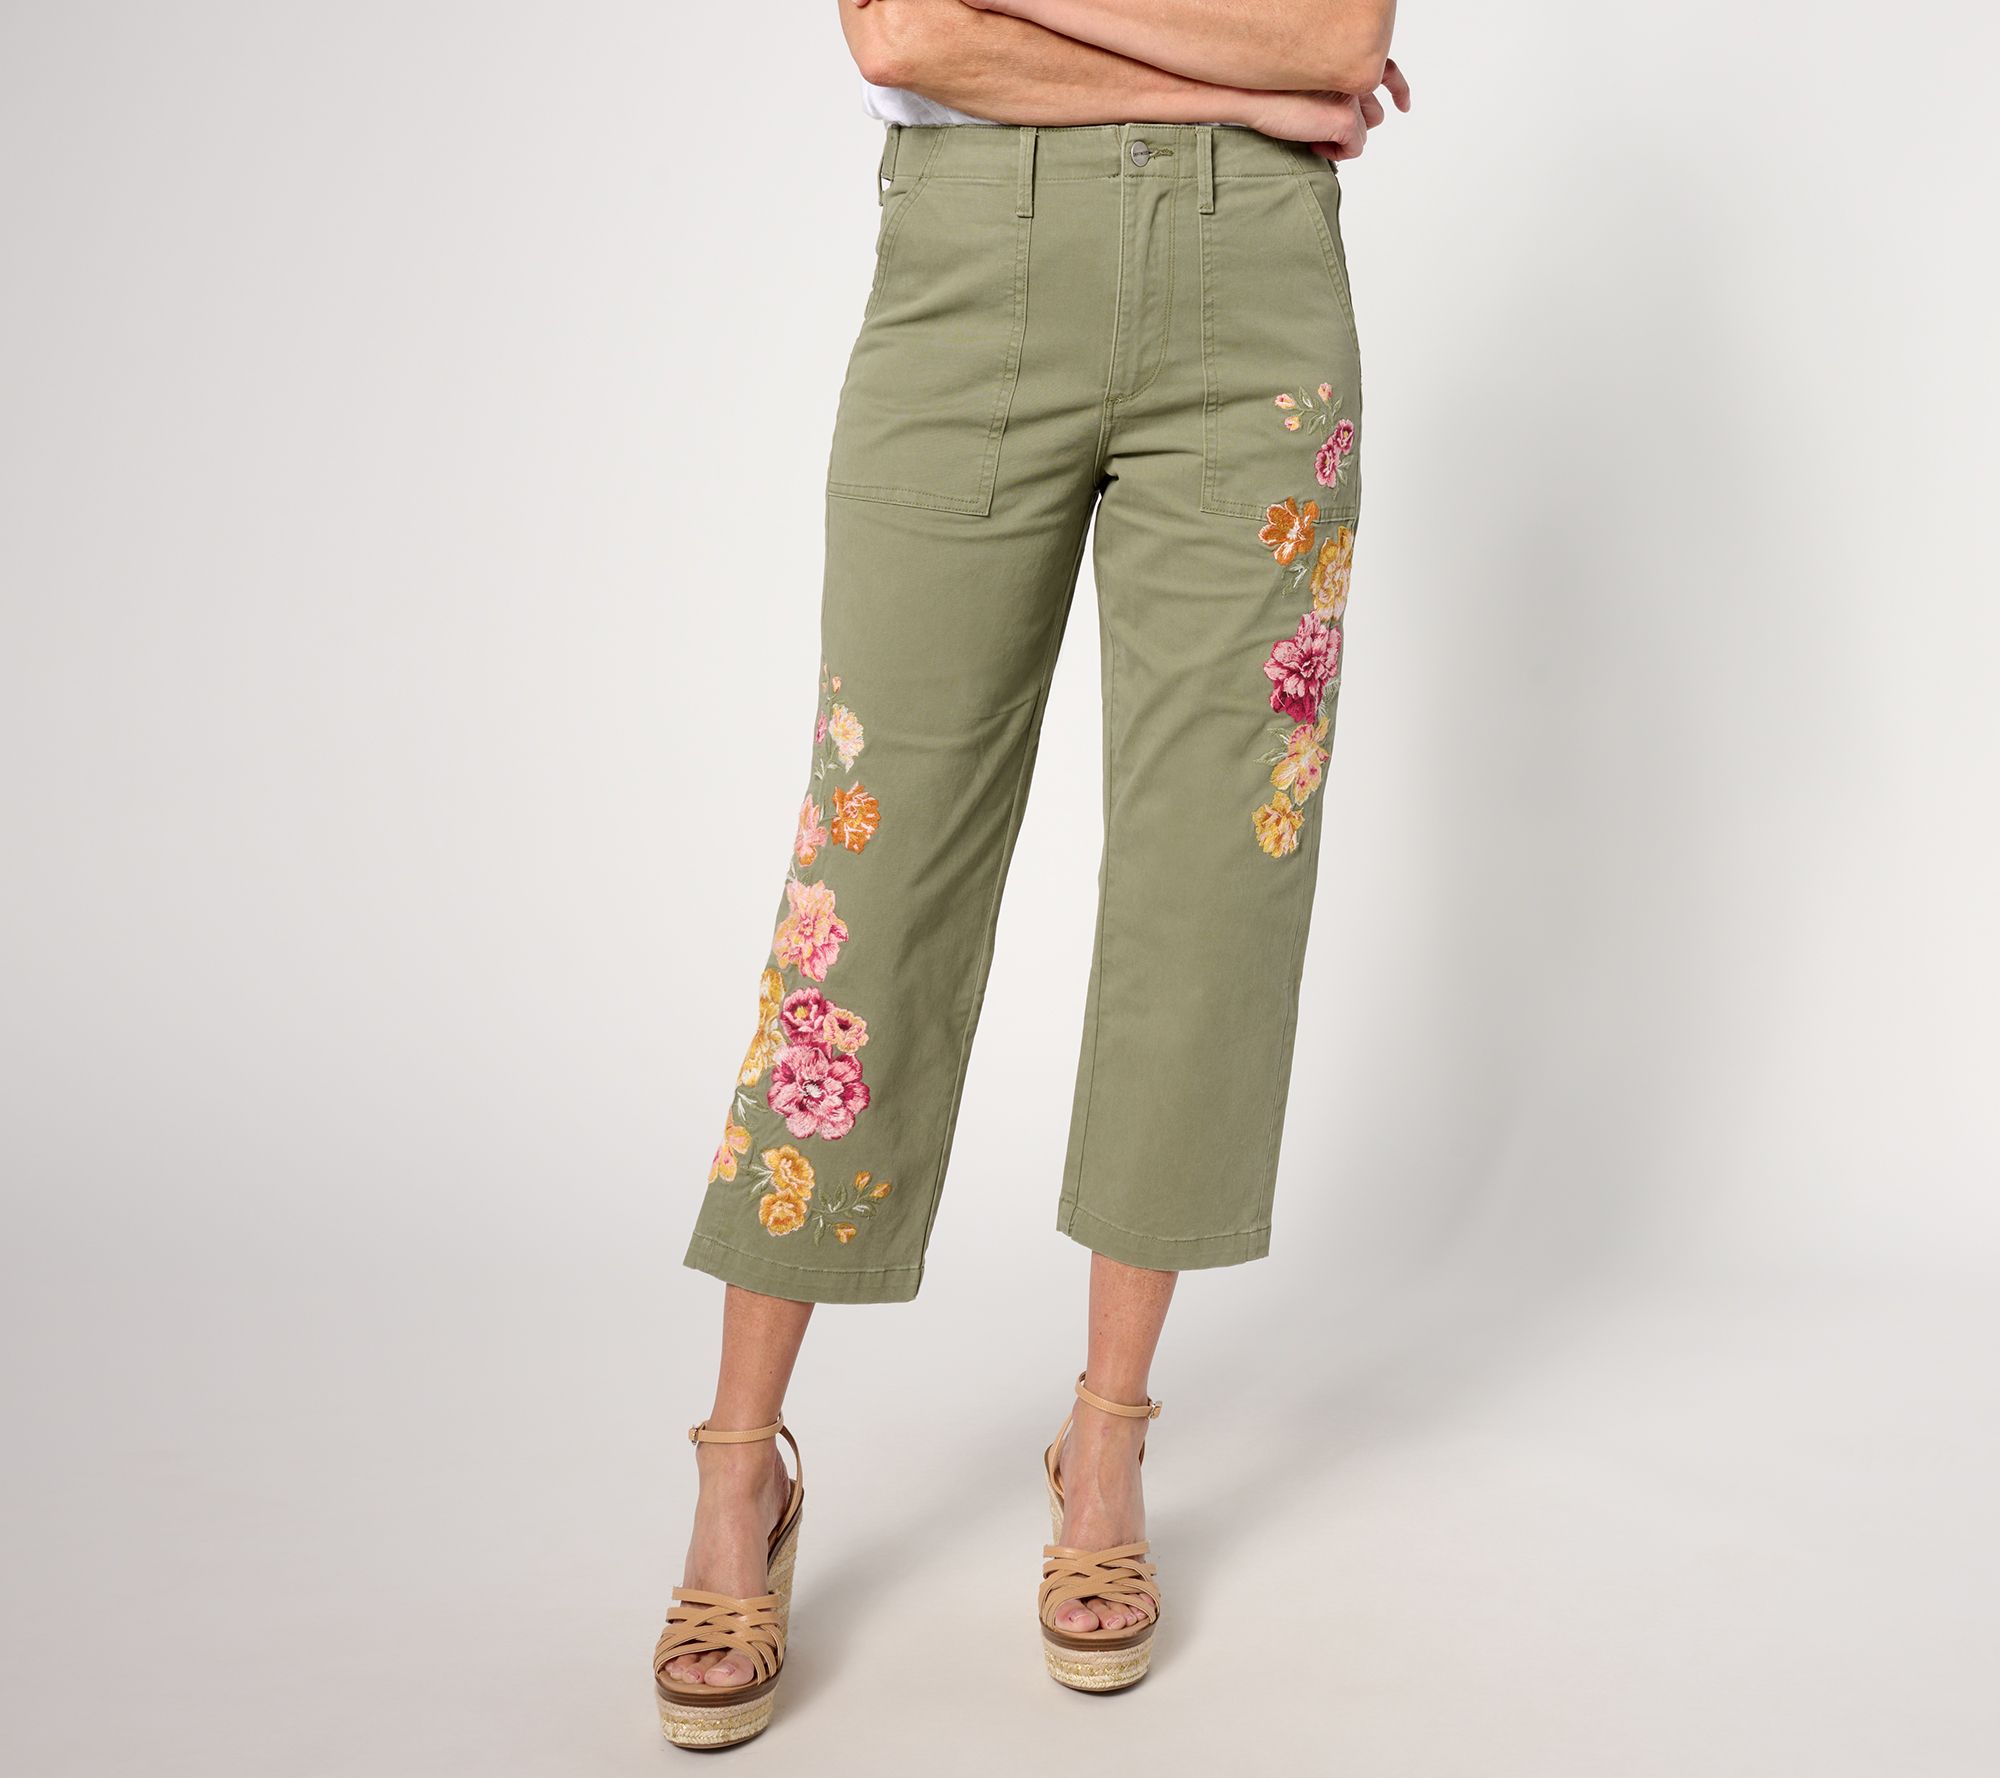 By Anthropologie Boxer Pants  Anthropologie Japan - Women's Clothing,  Accessories & Home